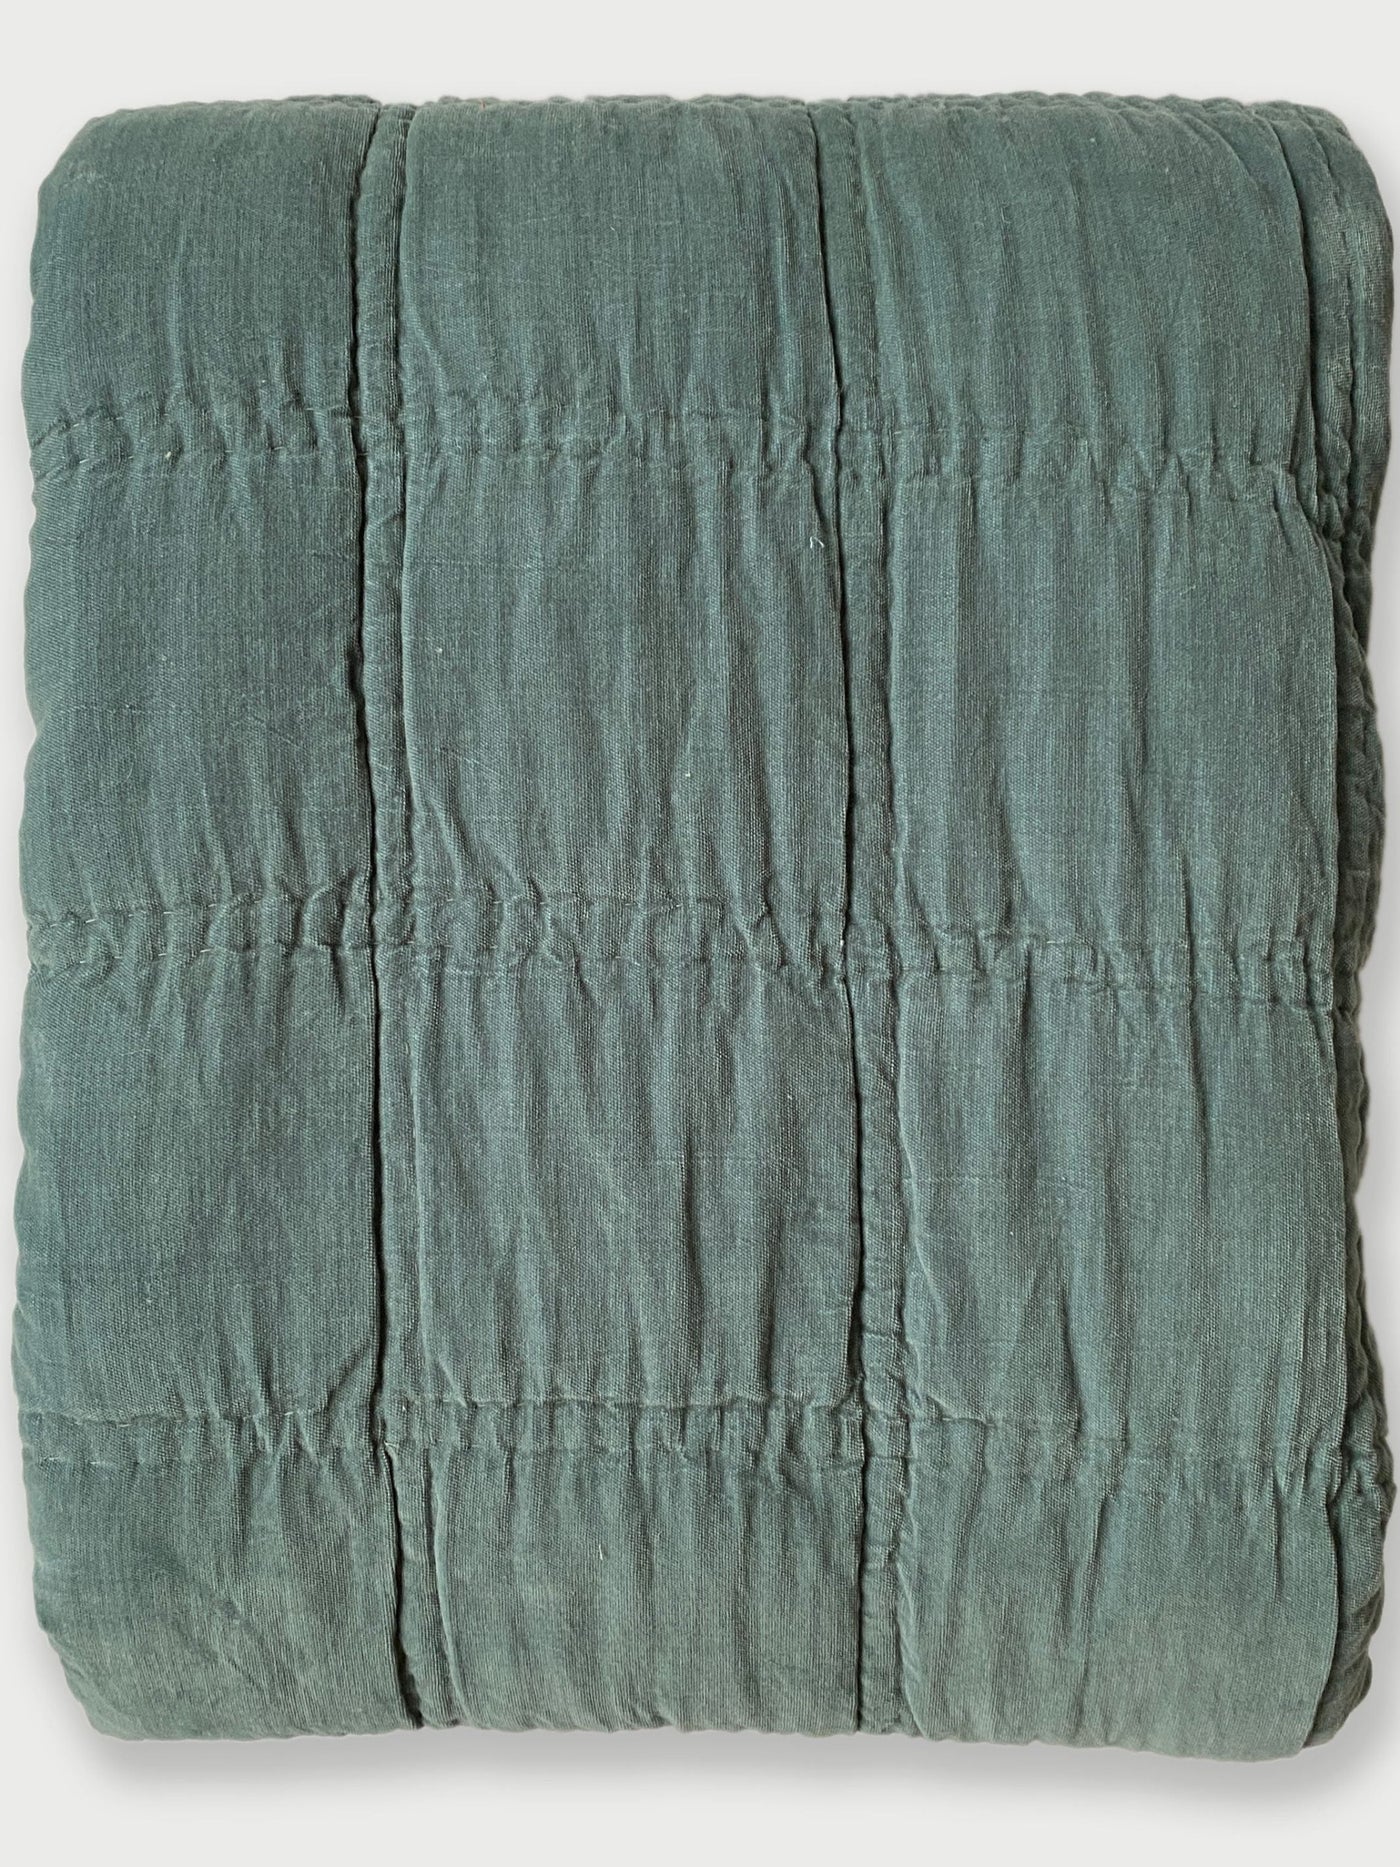 Quilt - Checker Embroidered Teal Kantha